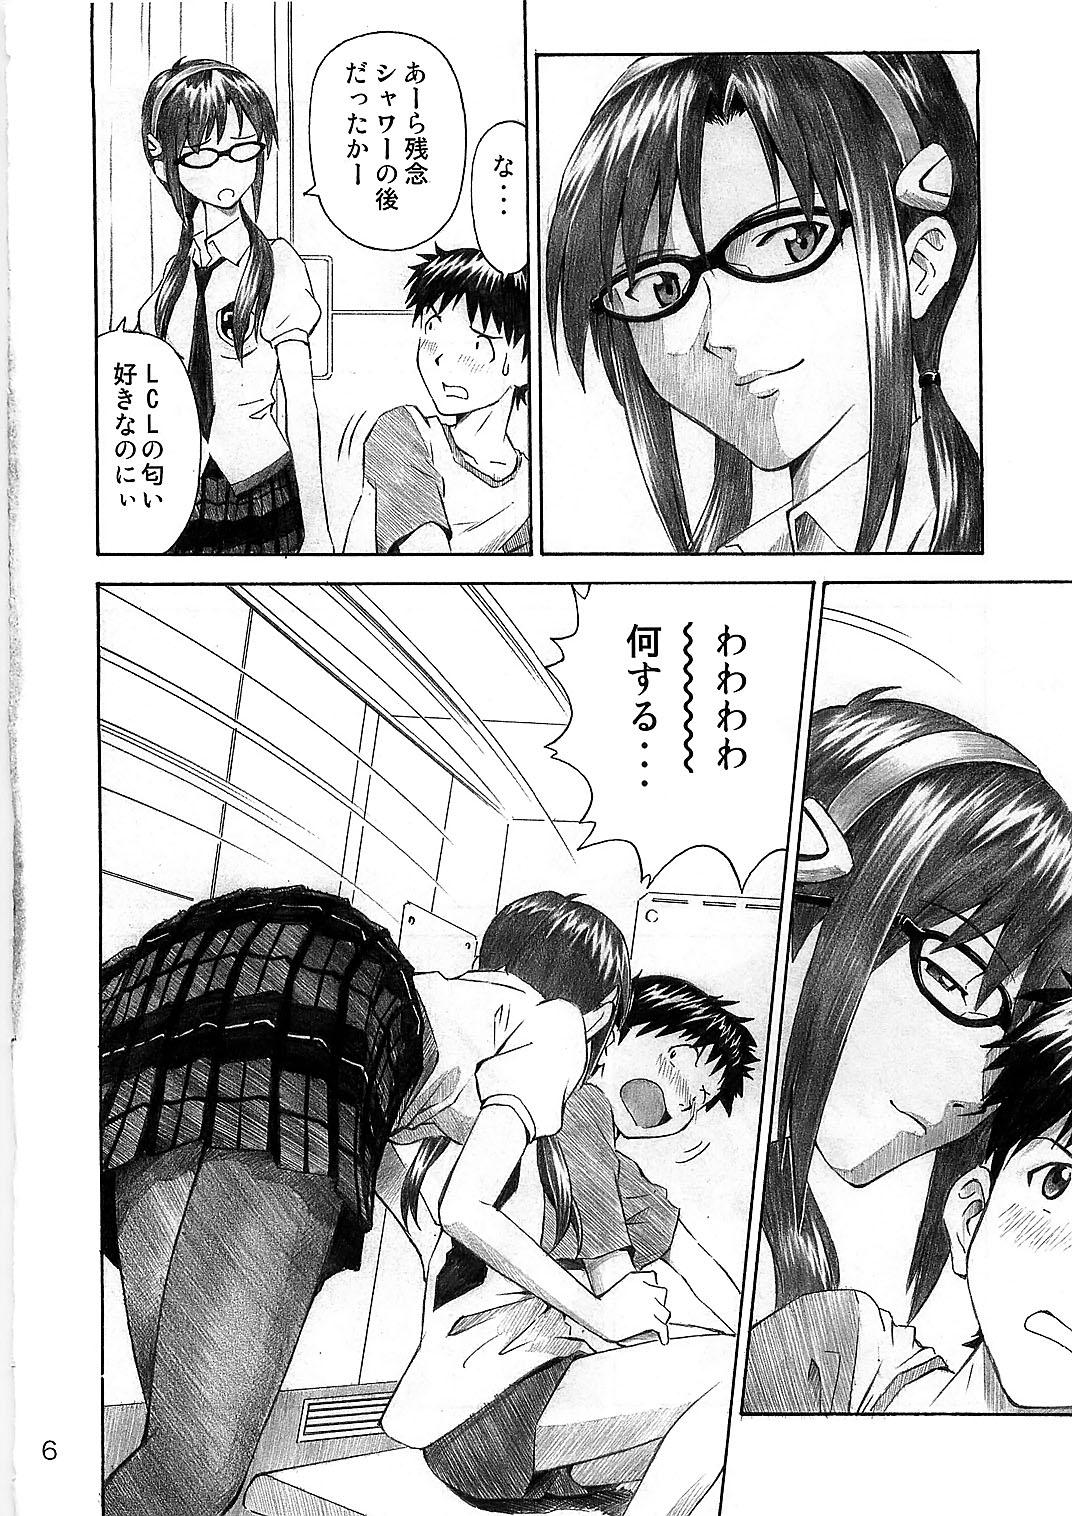 Celebrities Wanna Try? - Neon genesis evangelion Private Sex - Page 6